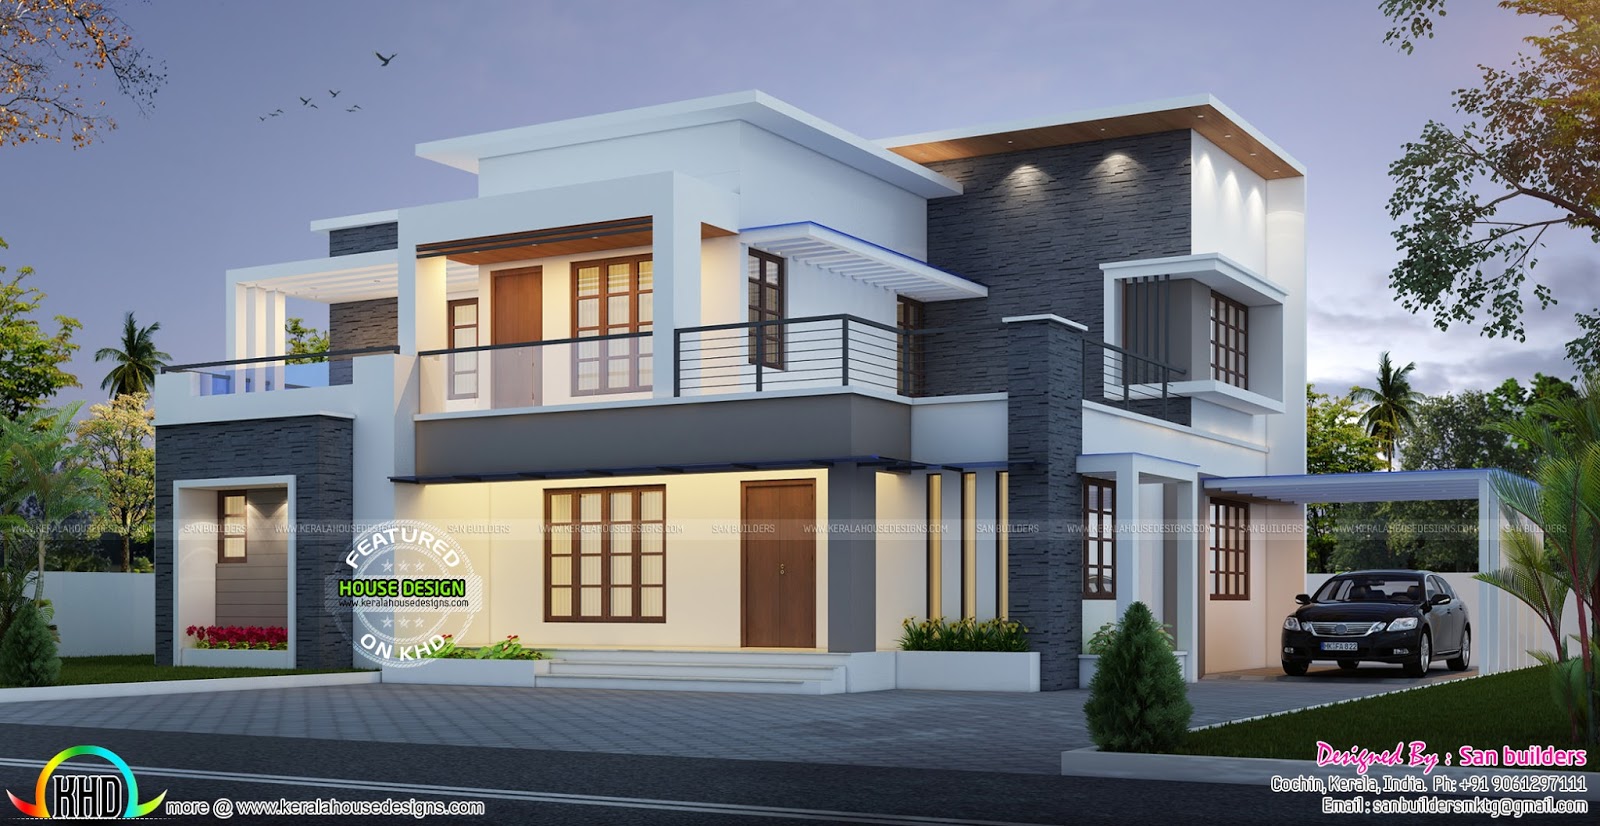  House  plan  and elevation  by San builders Kerala home  